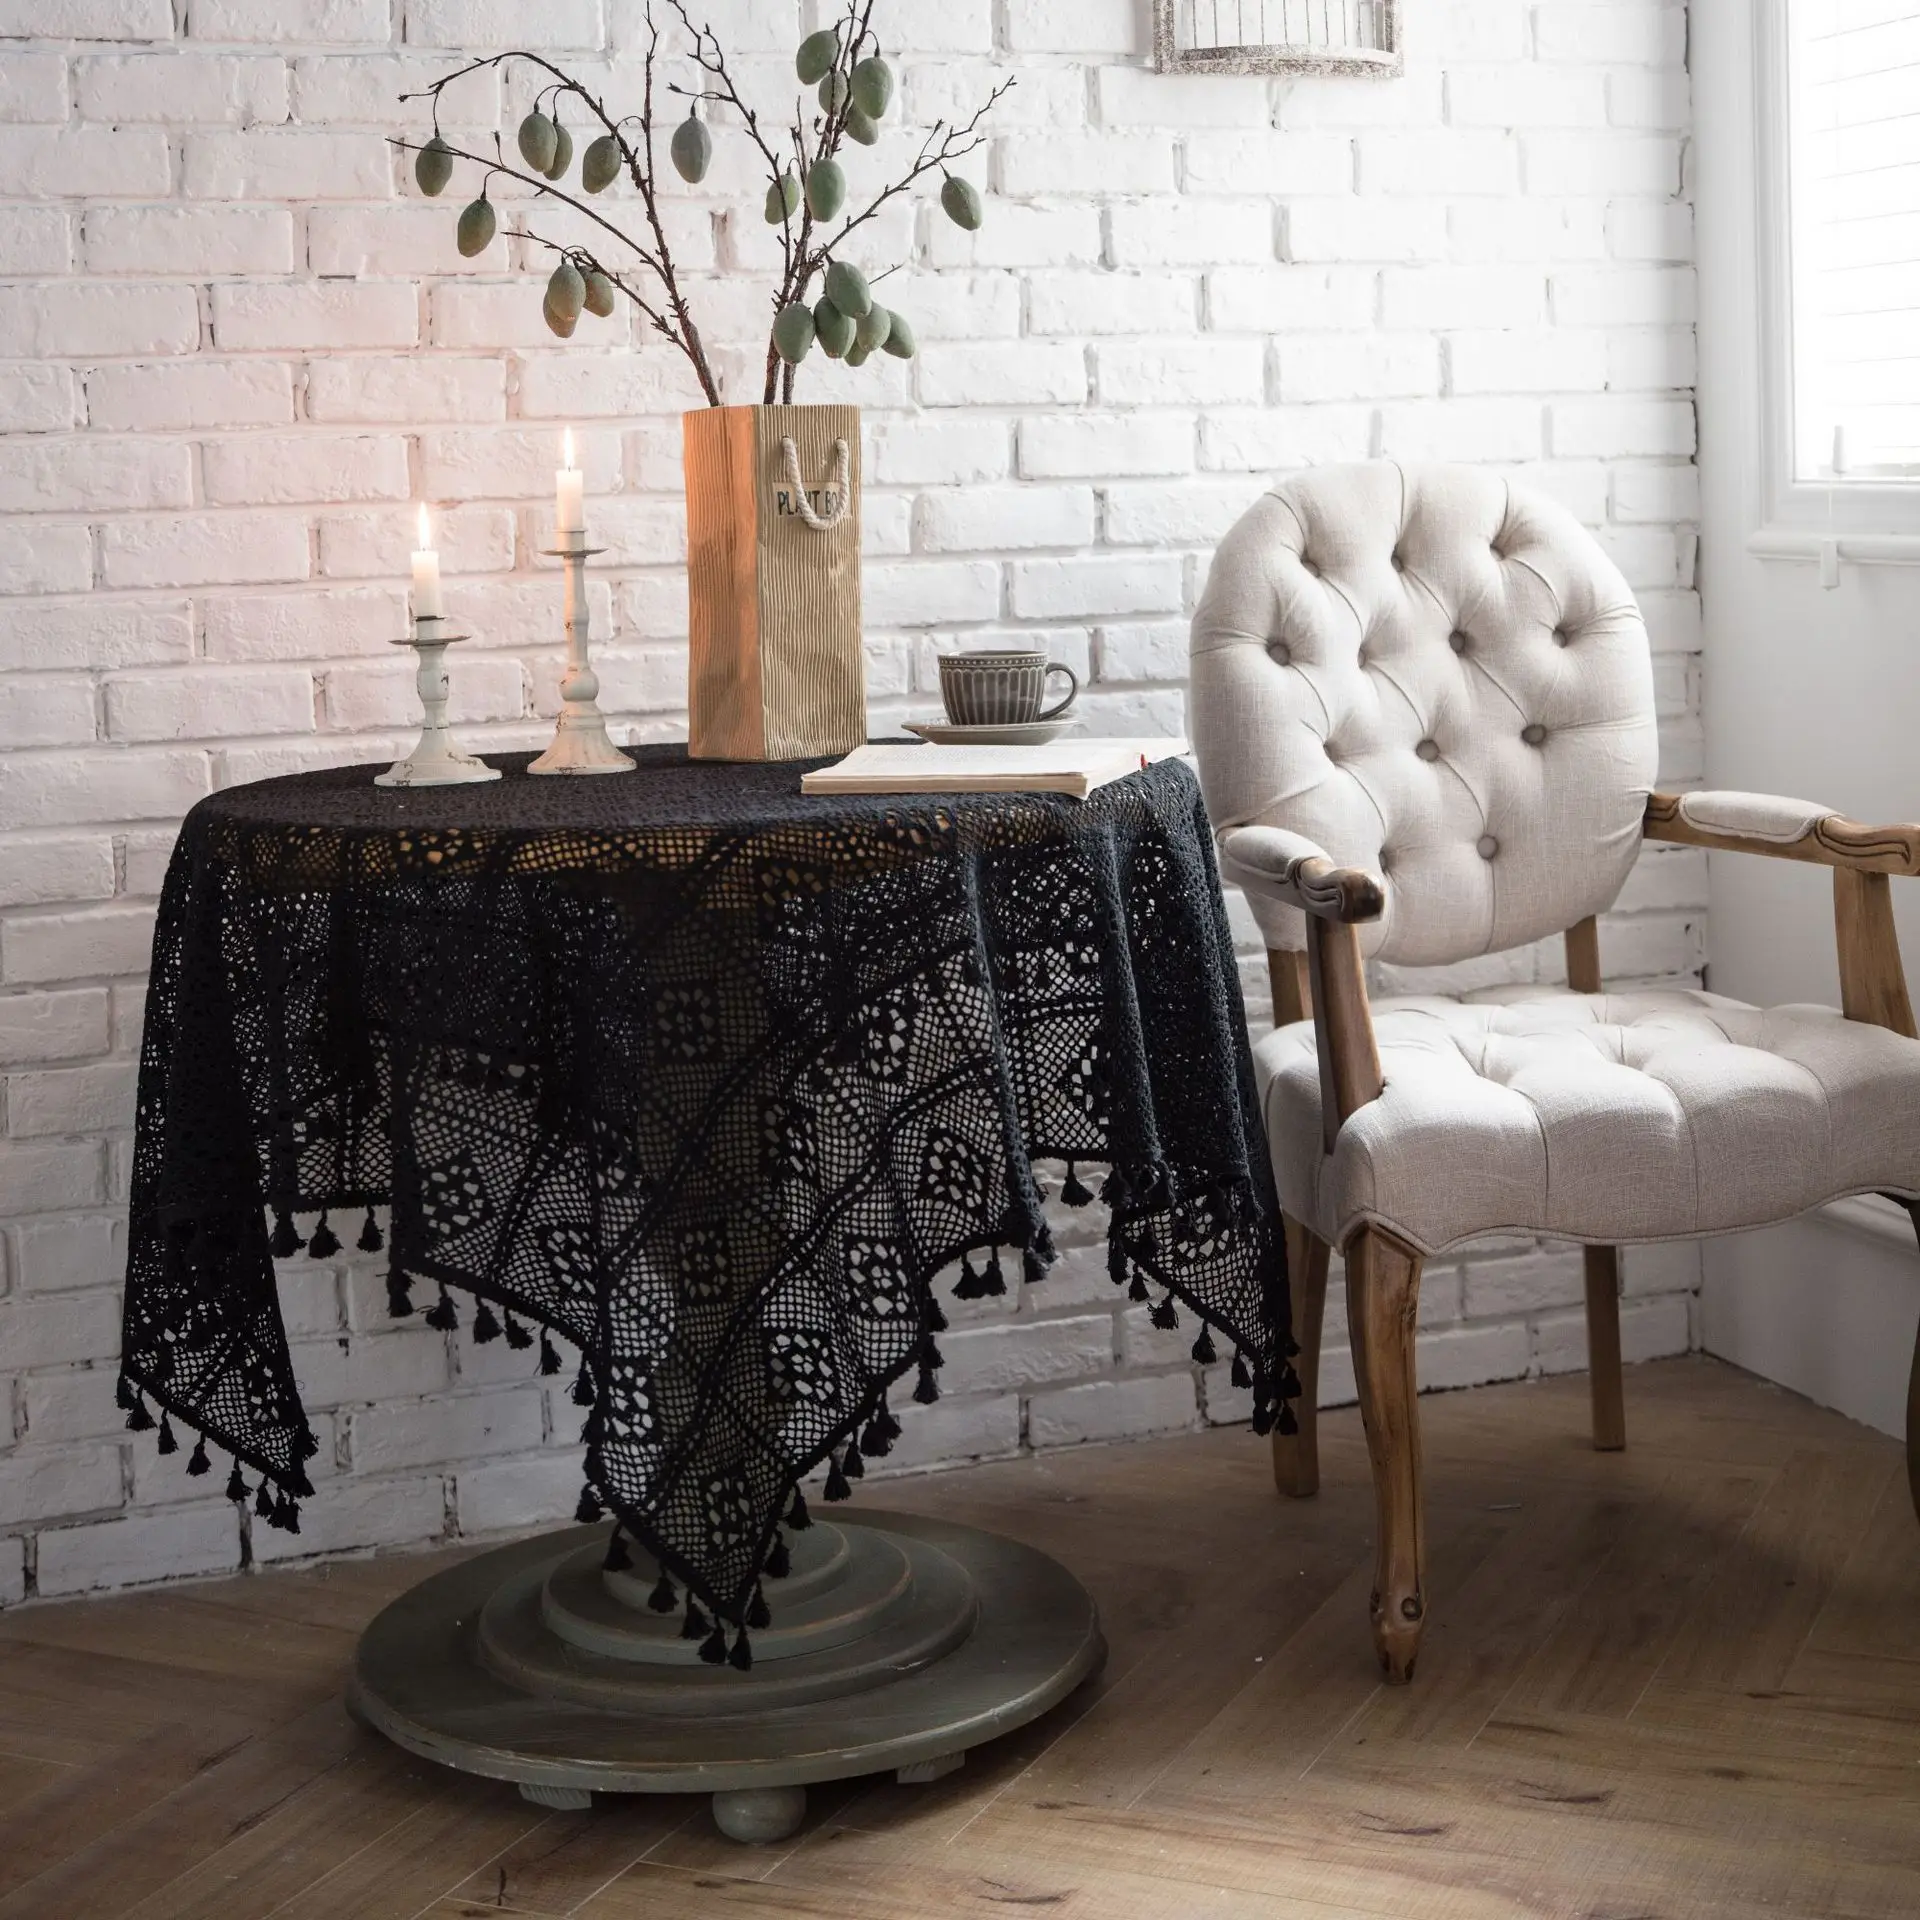 

Retro American Black Lace Rectangle Tablecloth Crochet Knitting Piano Towel Cover Round Tablecloth Table Decor Background Cloth